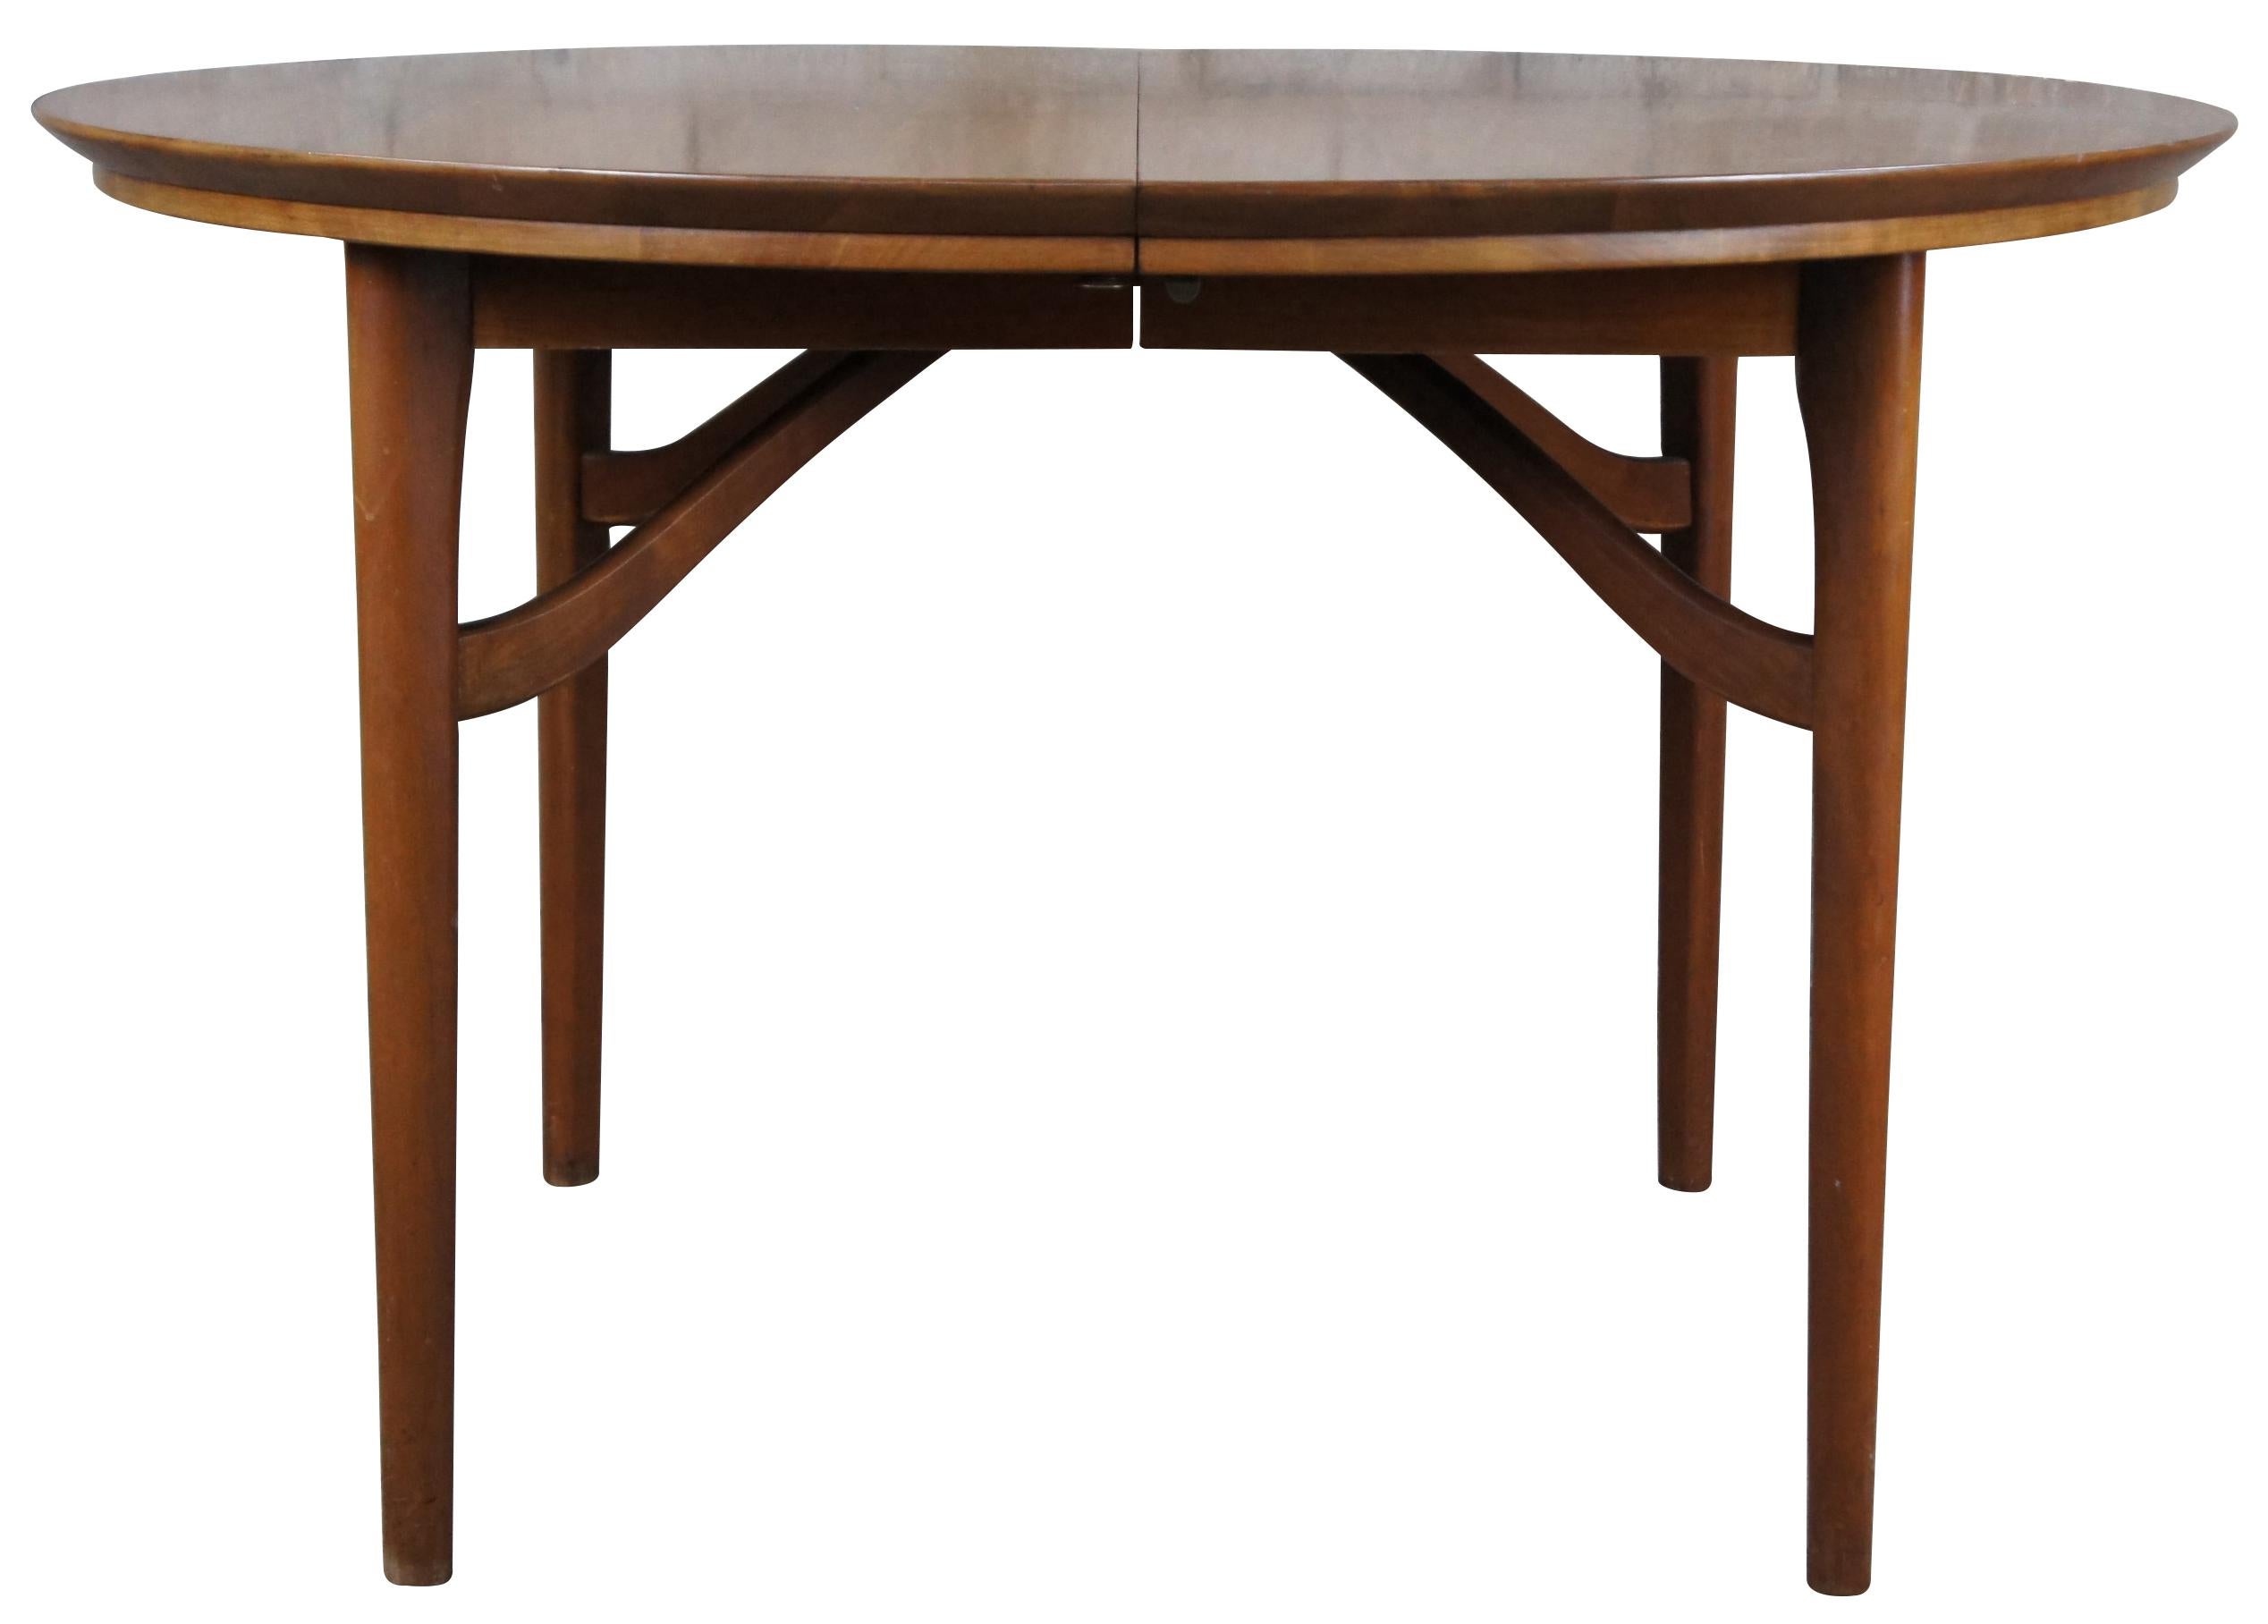 Statton Furniture mid century dining table. A round extendable form made from solid cherry with danish form. Sleek minimalist lines with a stunning wood grain. Great for use as a breakfast table or game table.

Statton Furniture was a staple in